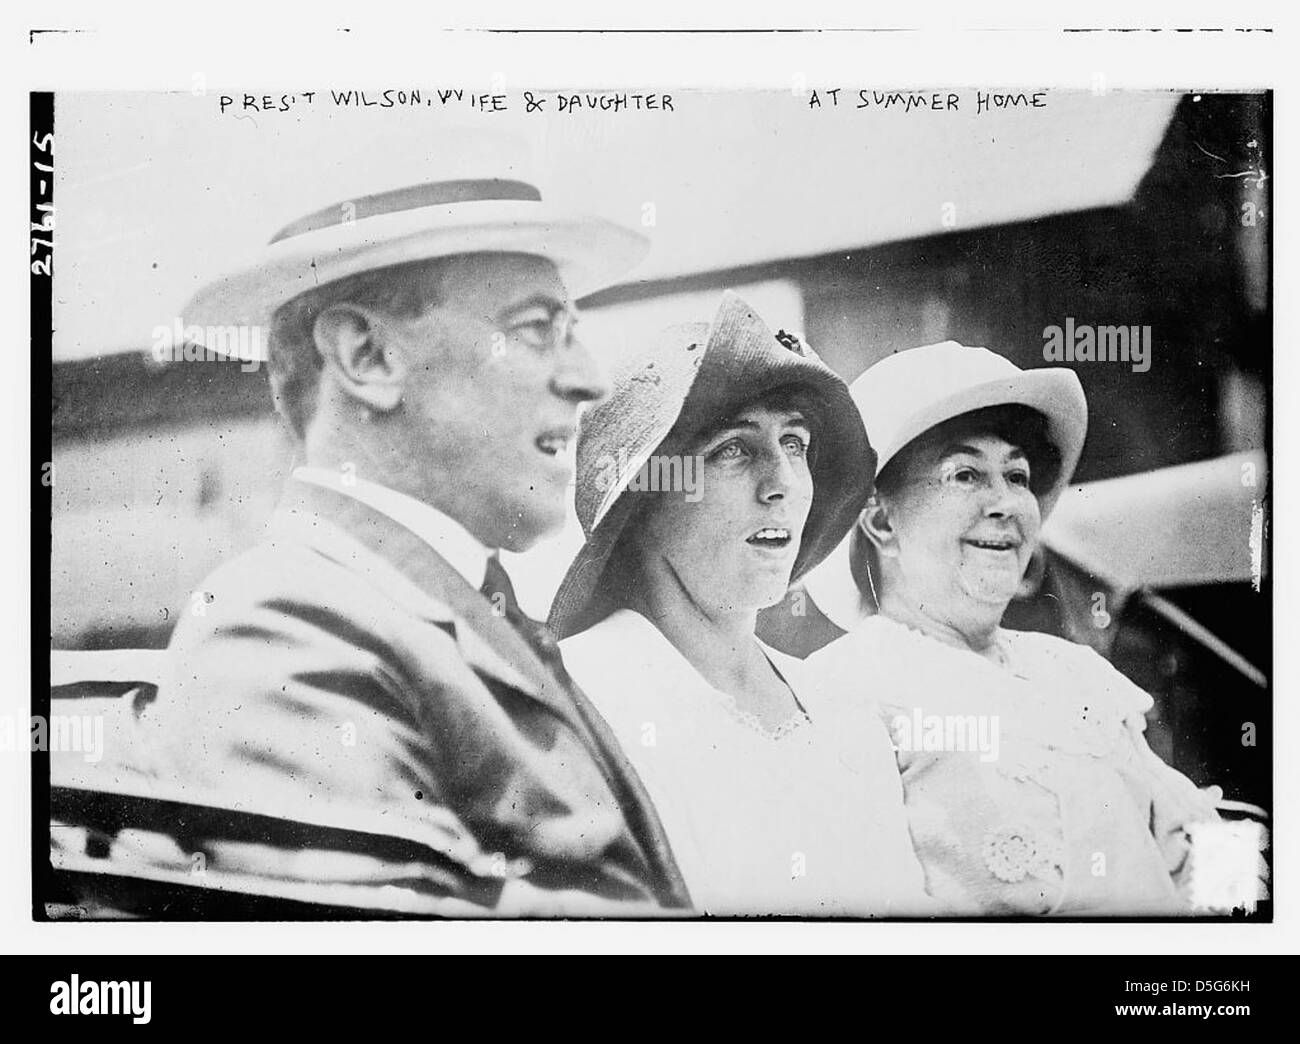 Pres't Wilson, wife & daughter at summer home (LOC) Stock Photo